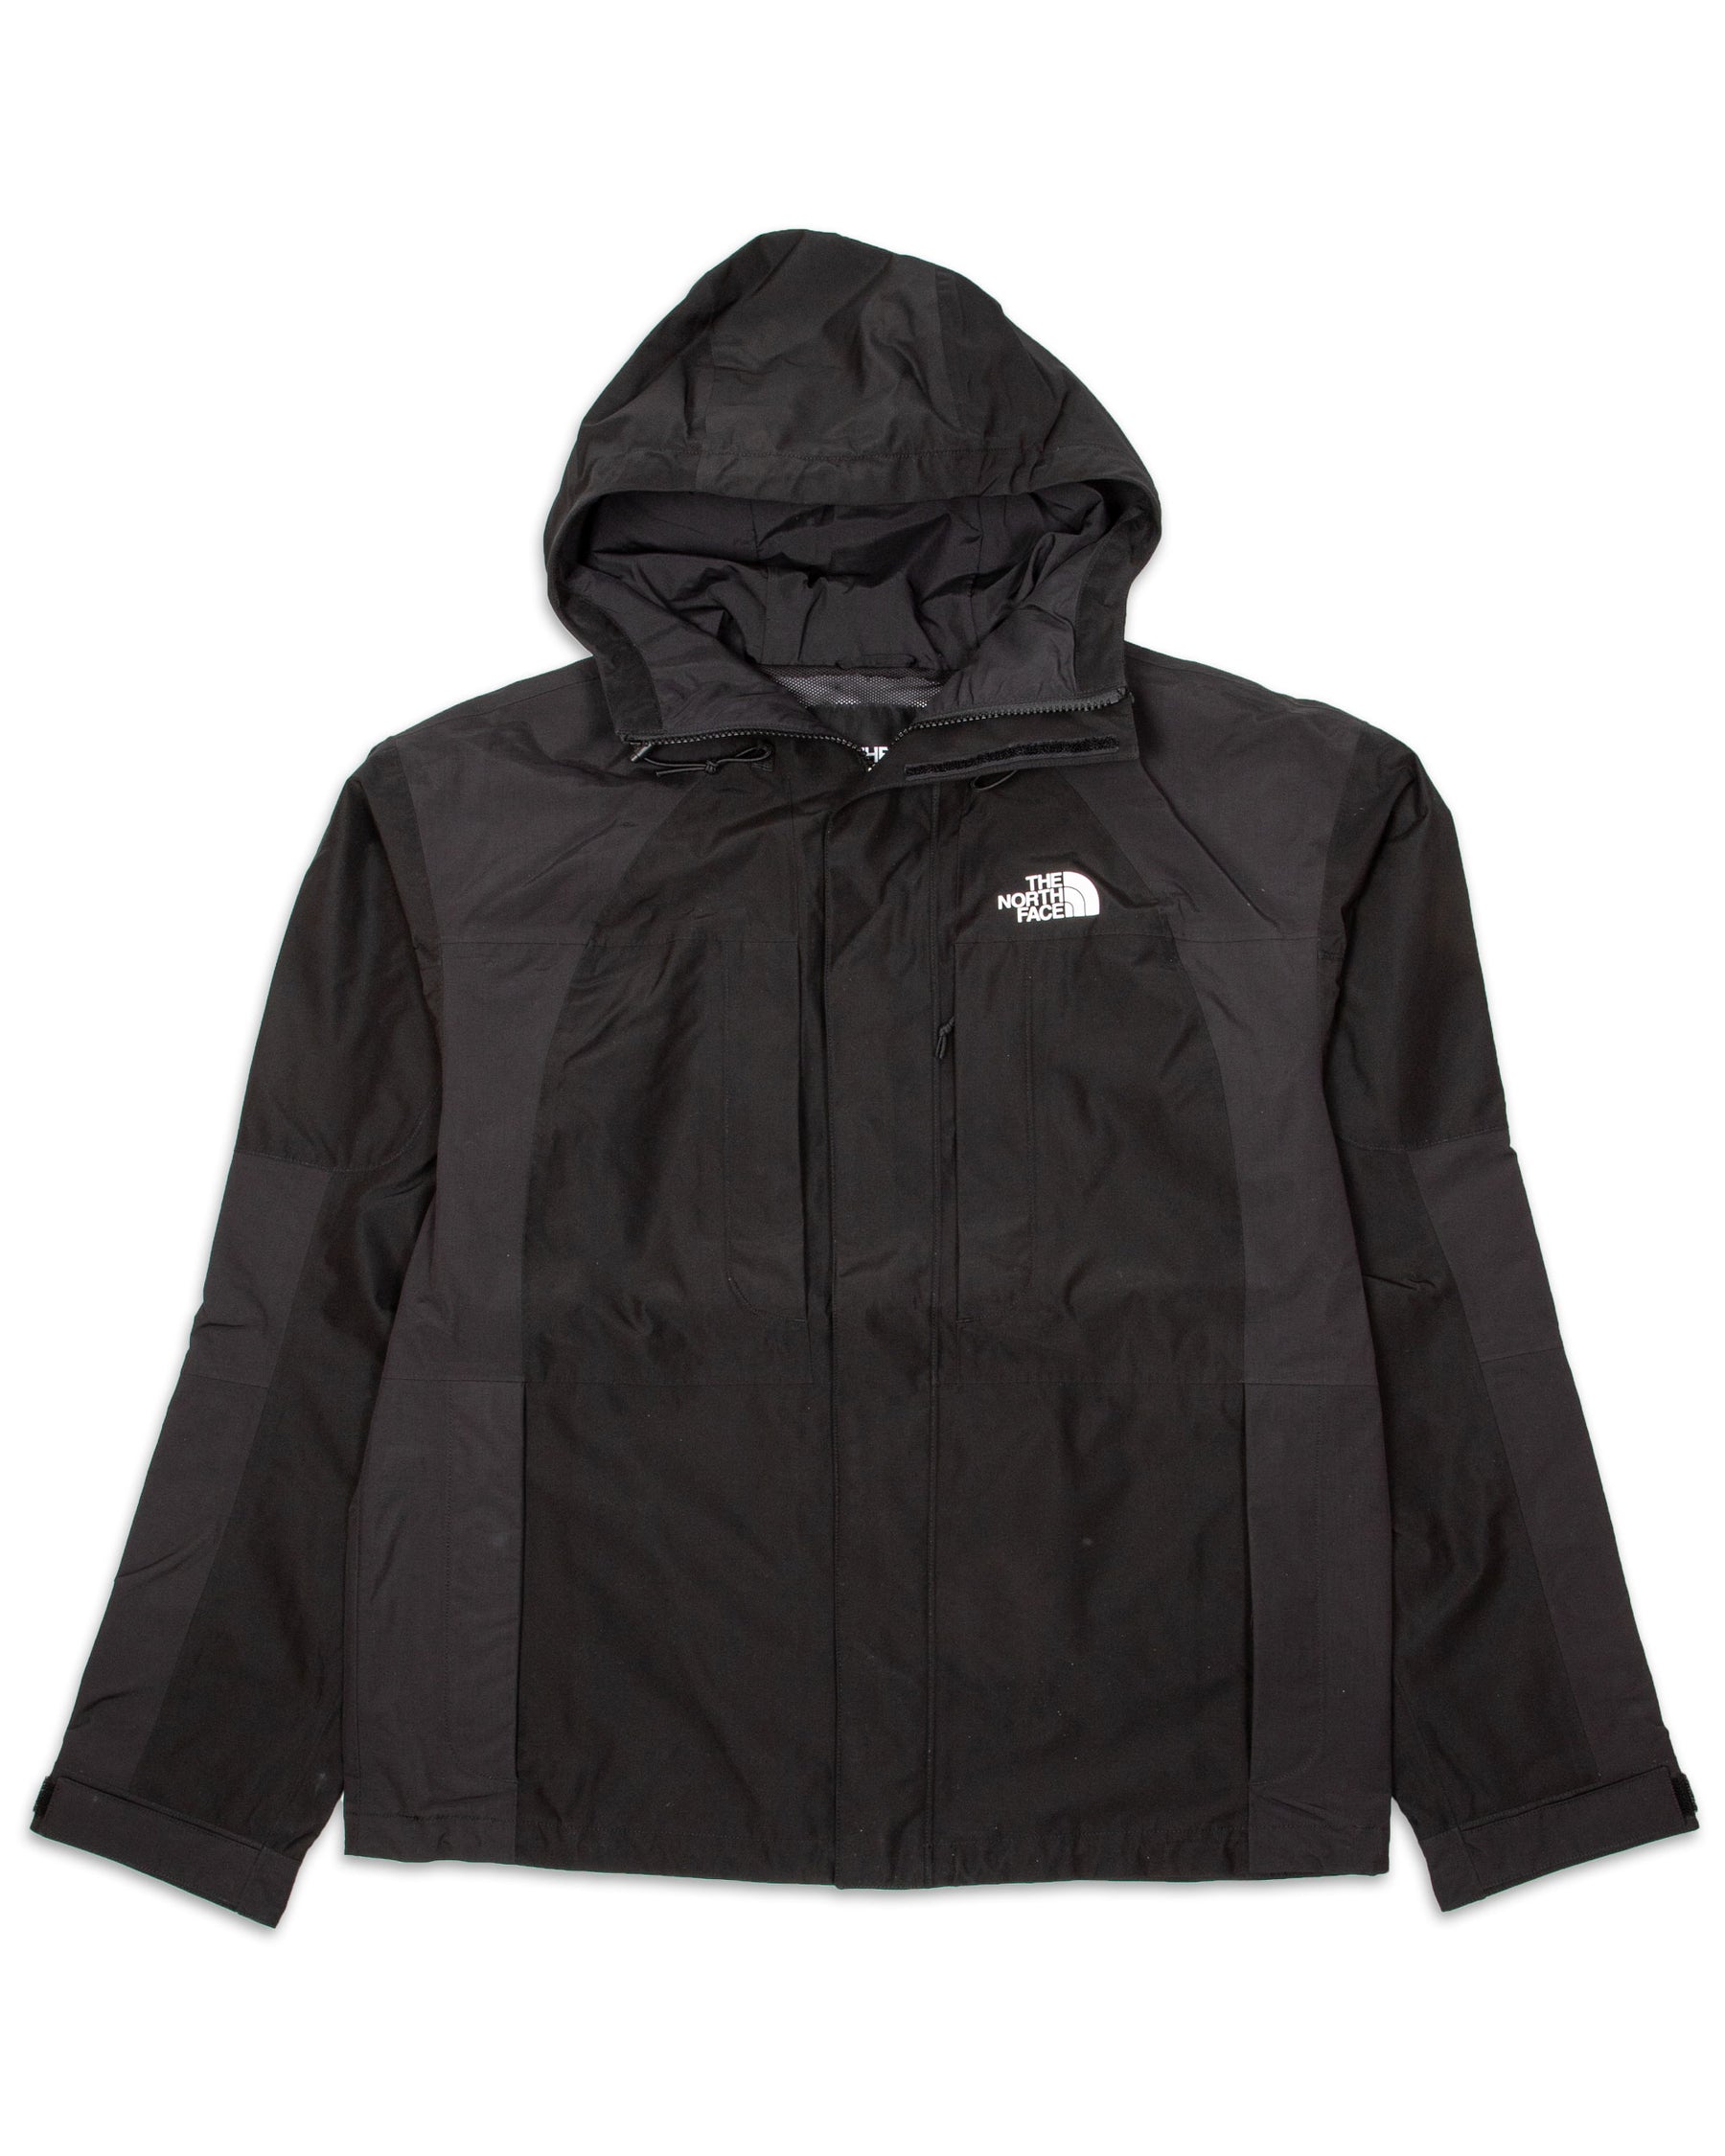 Giacca Uomo The North Face M2000 MTN Jacket Nero